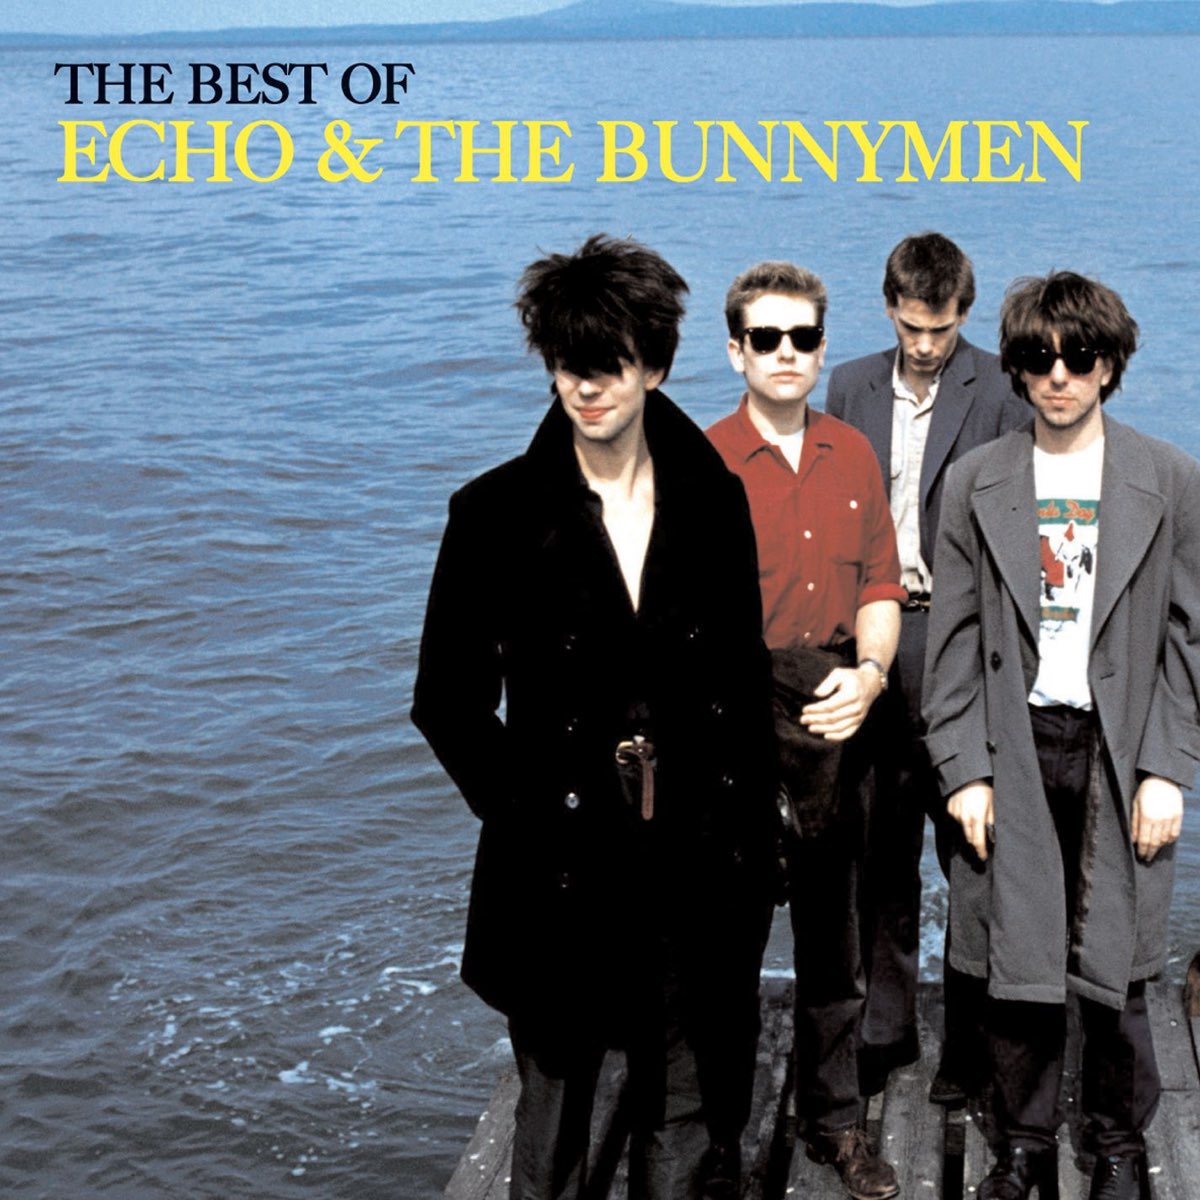 The Best of Echo & the Bunnymen - Album by Echo & The Bunnymen - Apple Music